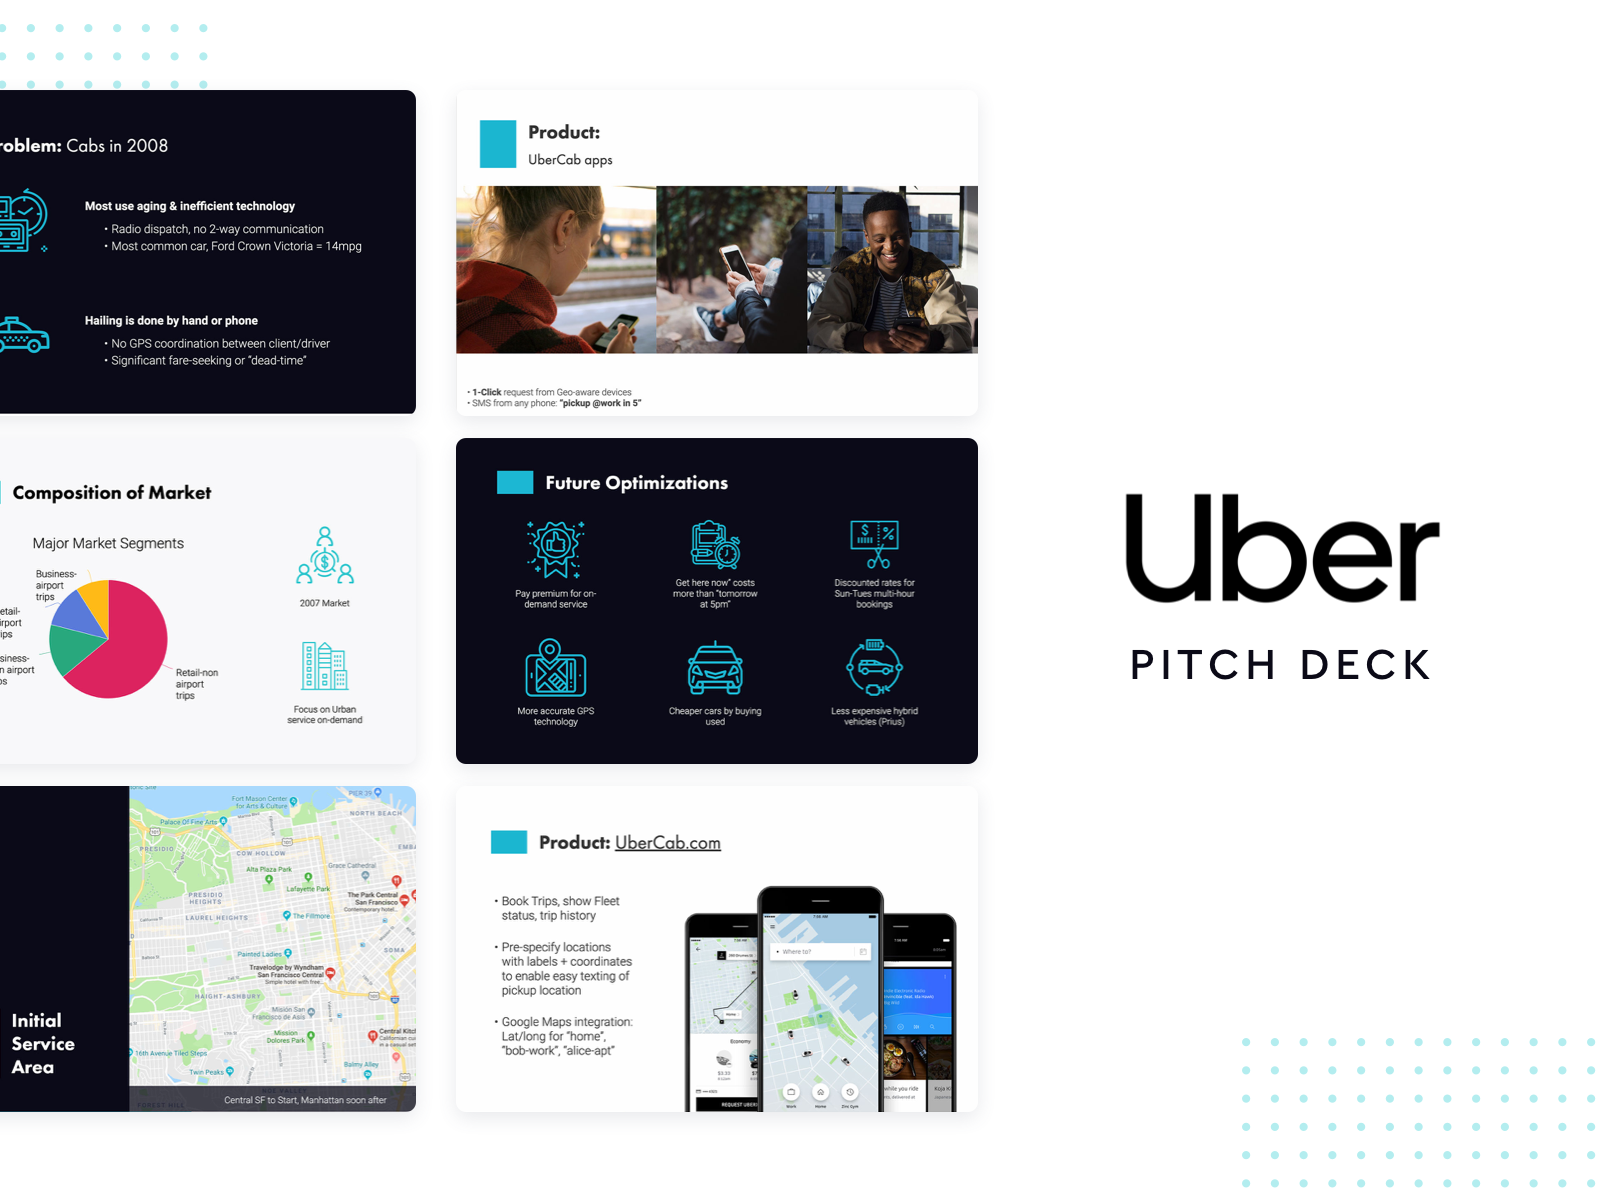 Uber Pitch Deck Template by Slidebean Presentation and Pitch Deck